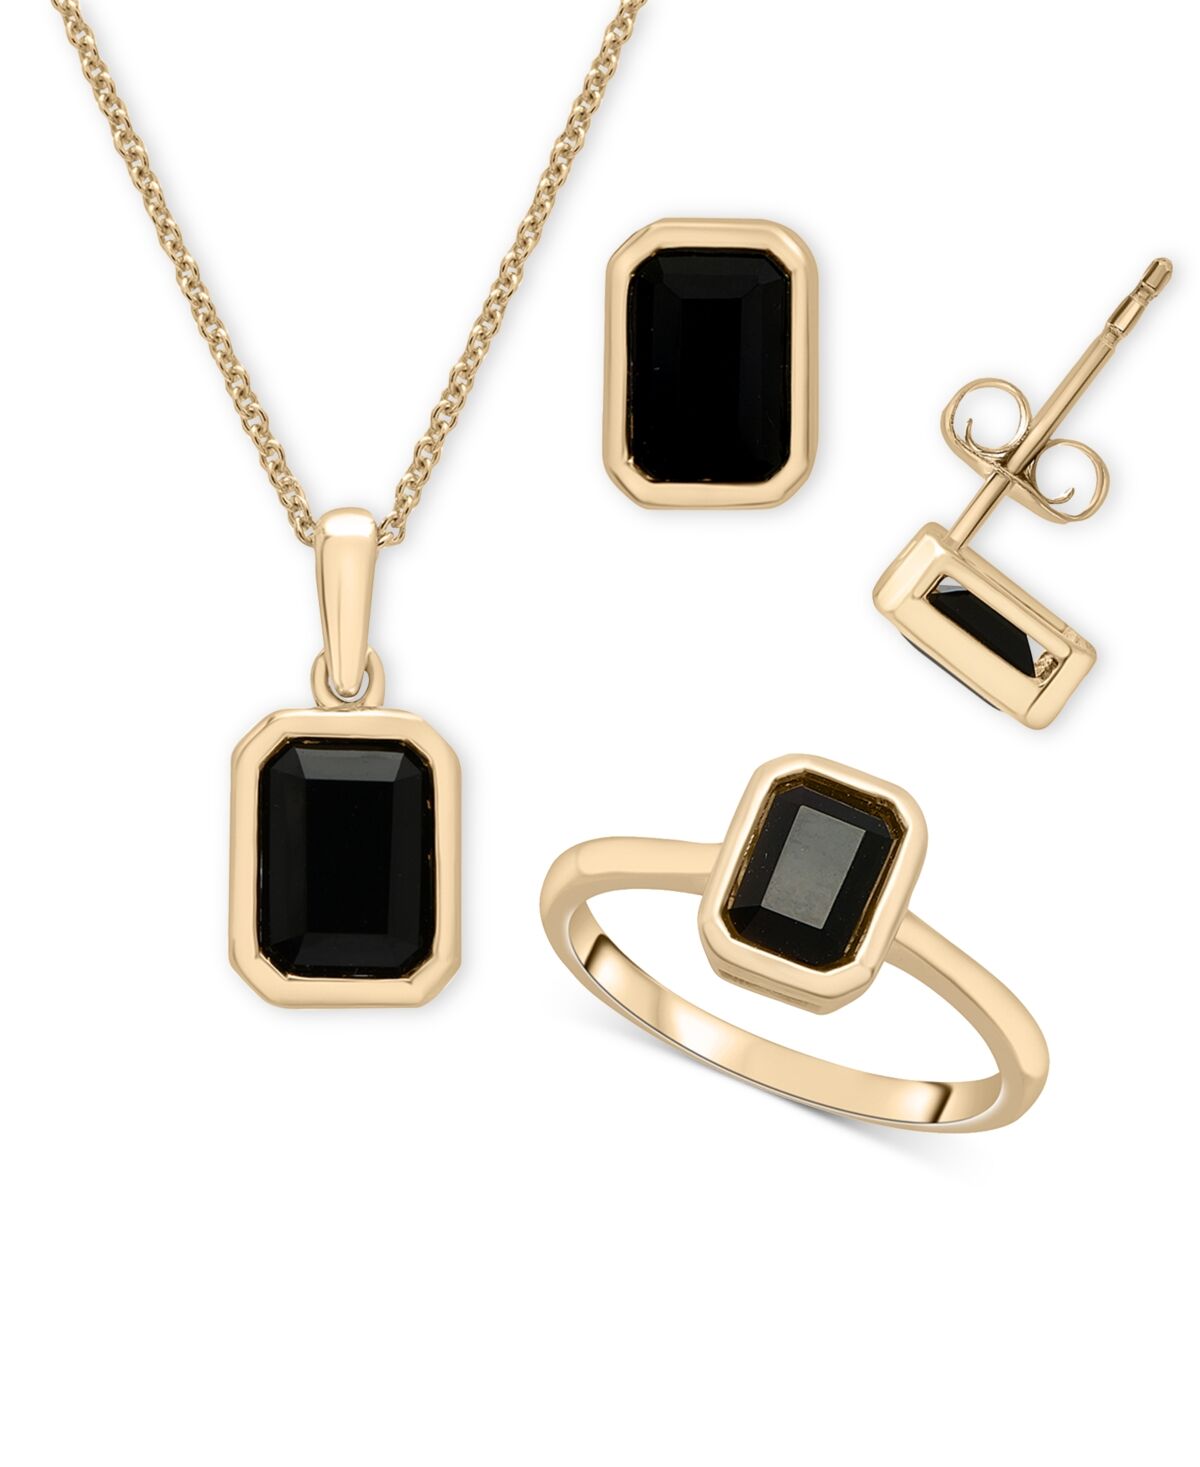 Macy's 3-Pc. Set Onyx Octagon Pendant Necklace, Ring & Stud Earrings in 14k Gold-Plated Sterling Silver - Onyx